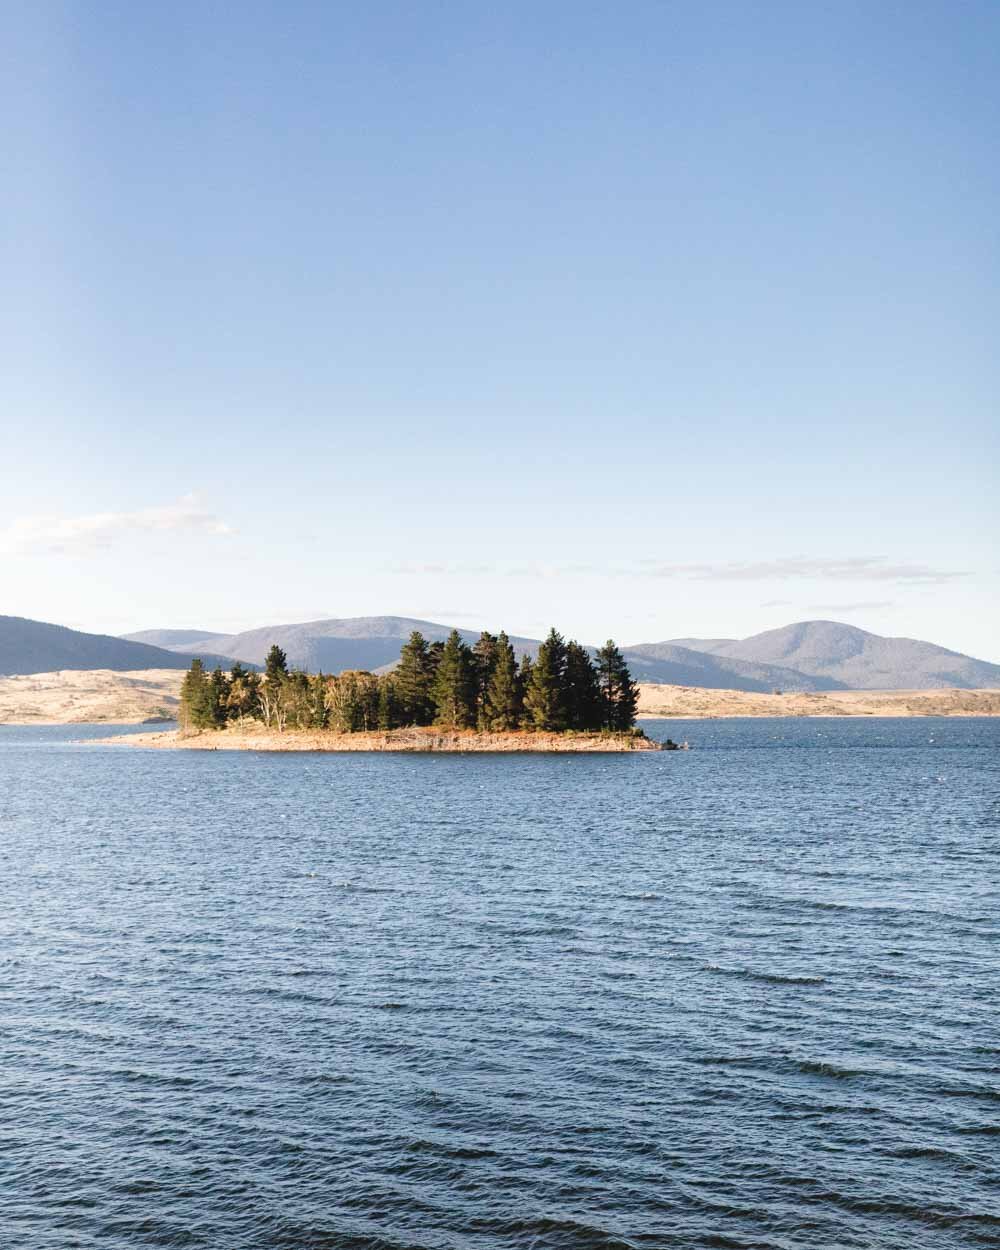 Things to do in Jindabyne - Take a dip in the lake